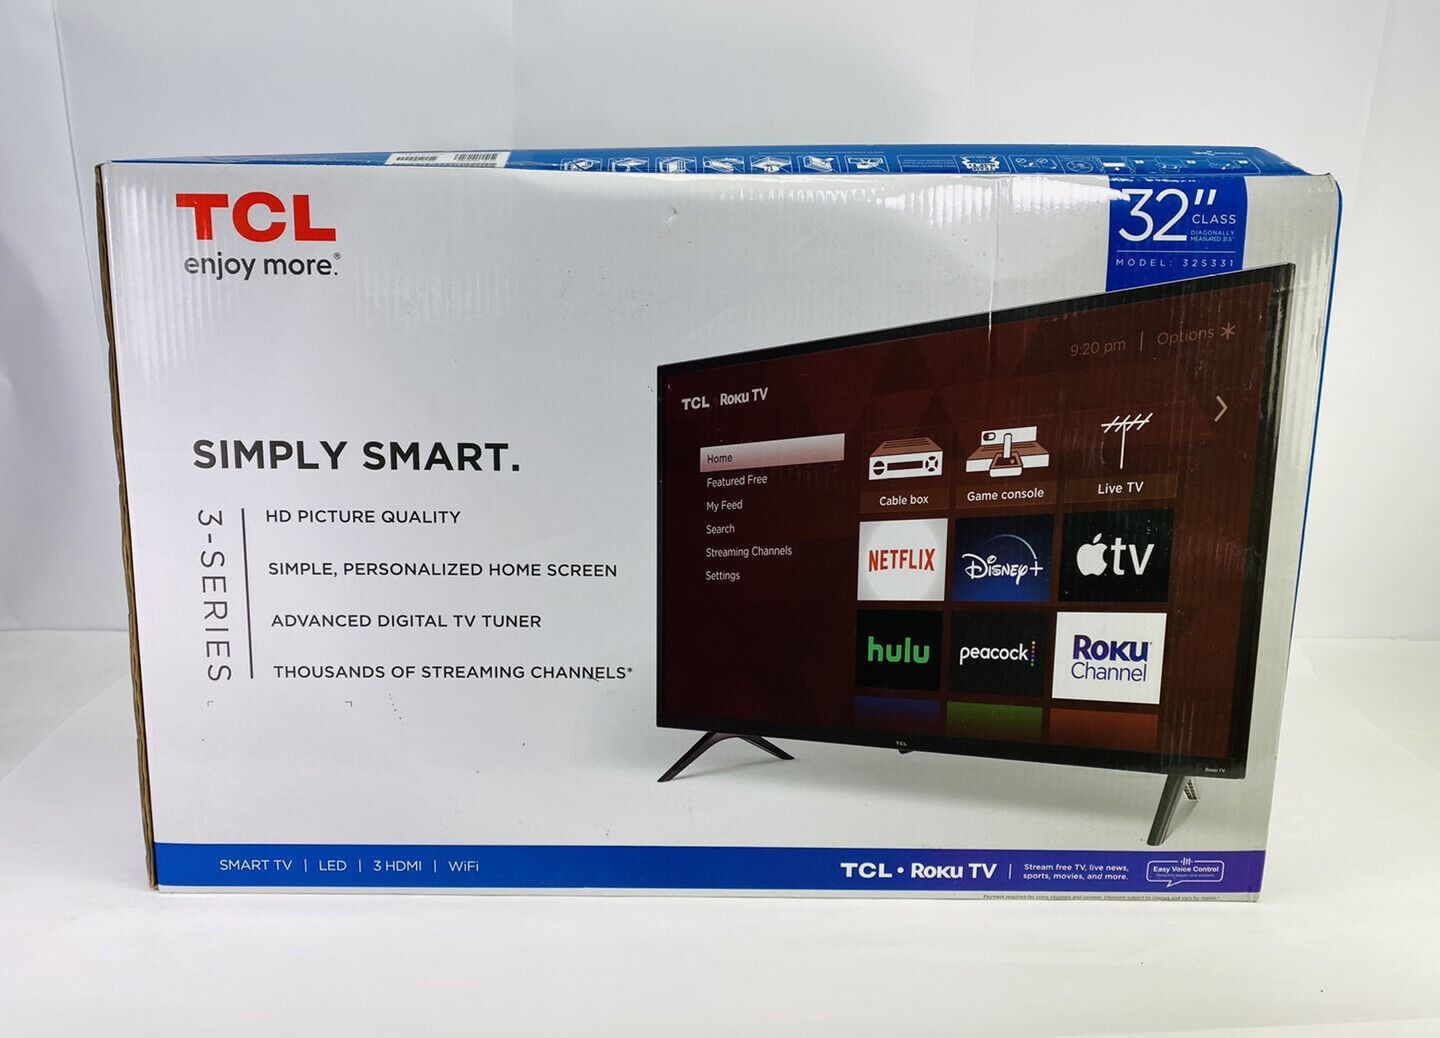 Tv TCL 32" CLASE 3-SERIES HD LED 32S301 32´´ SMART 1